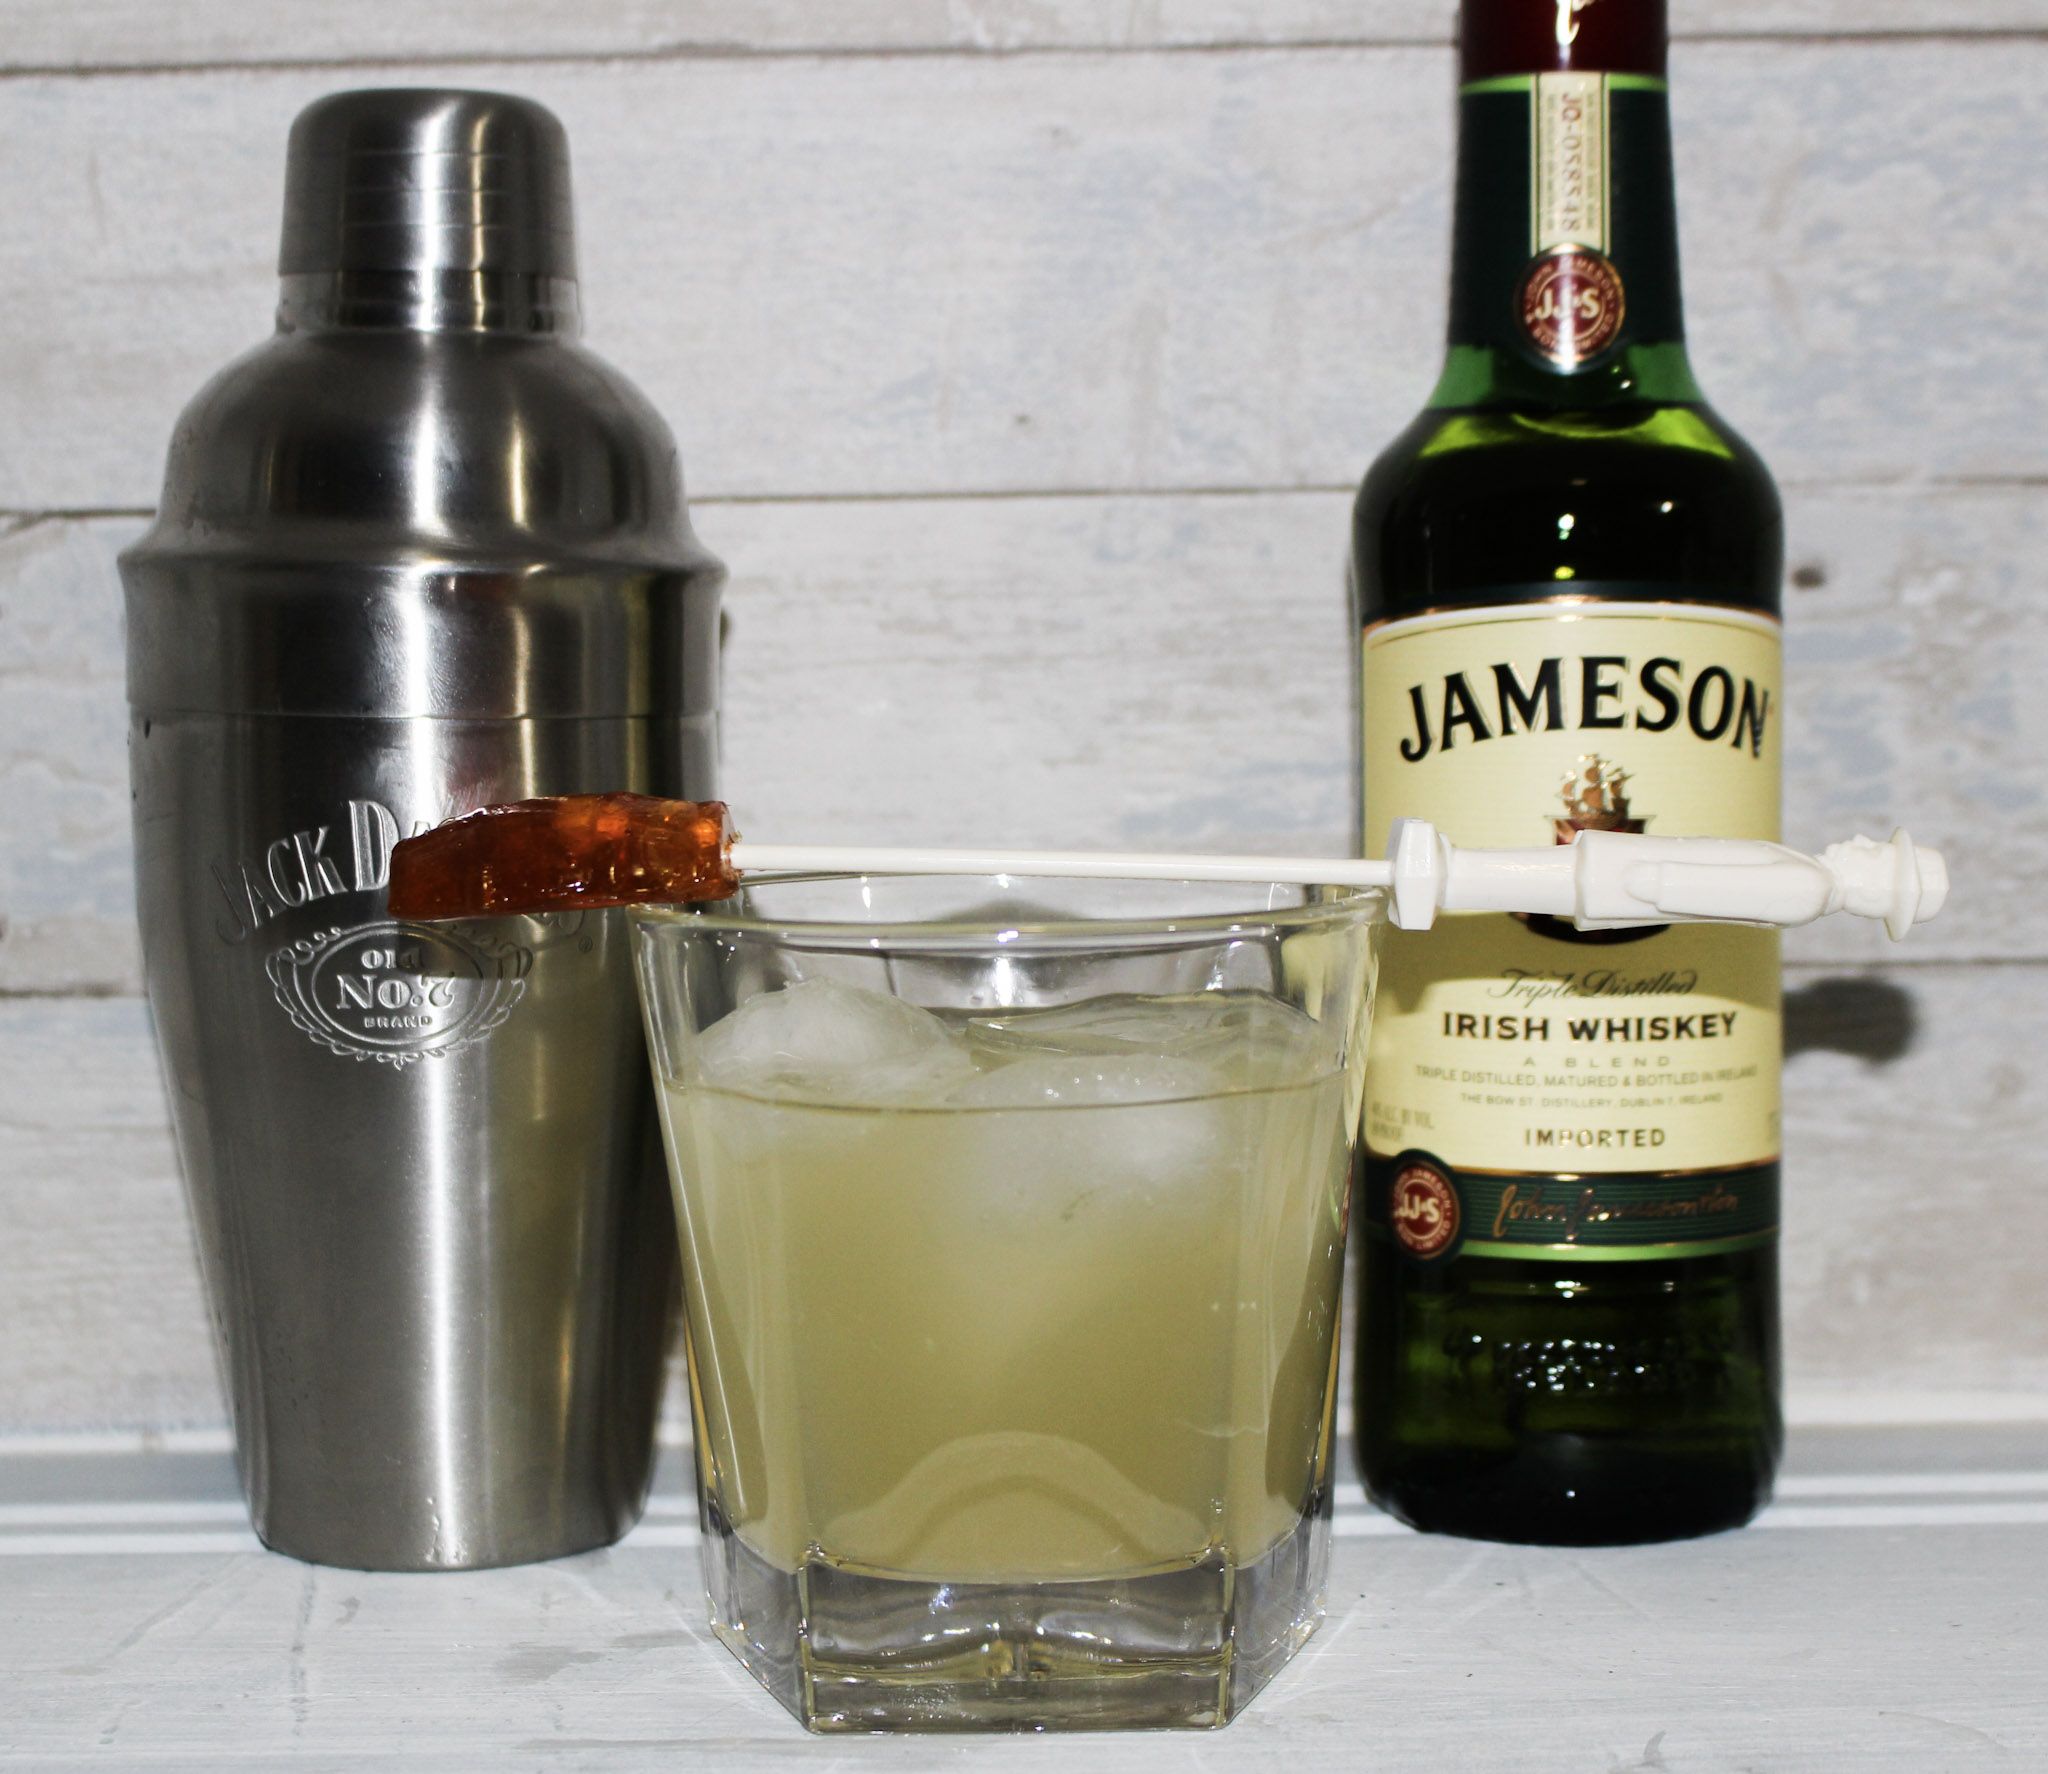 Jameson Irish Whiskey shown with shaker and glass filled with stir stick